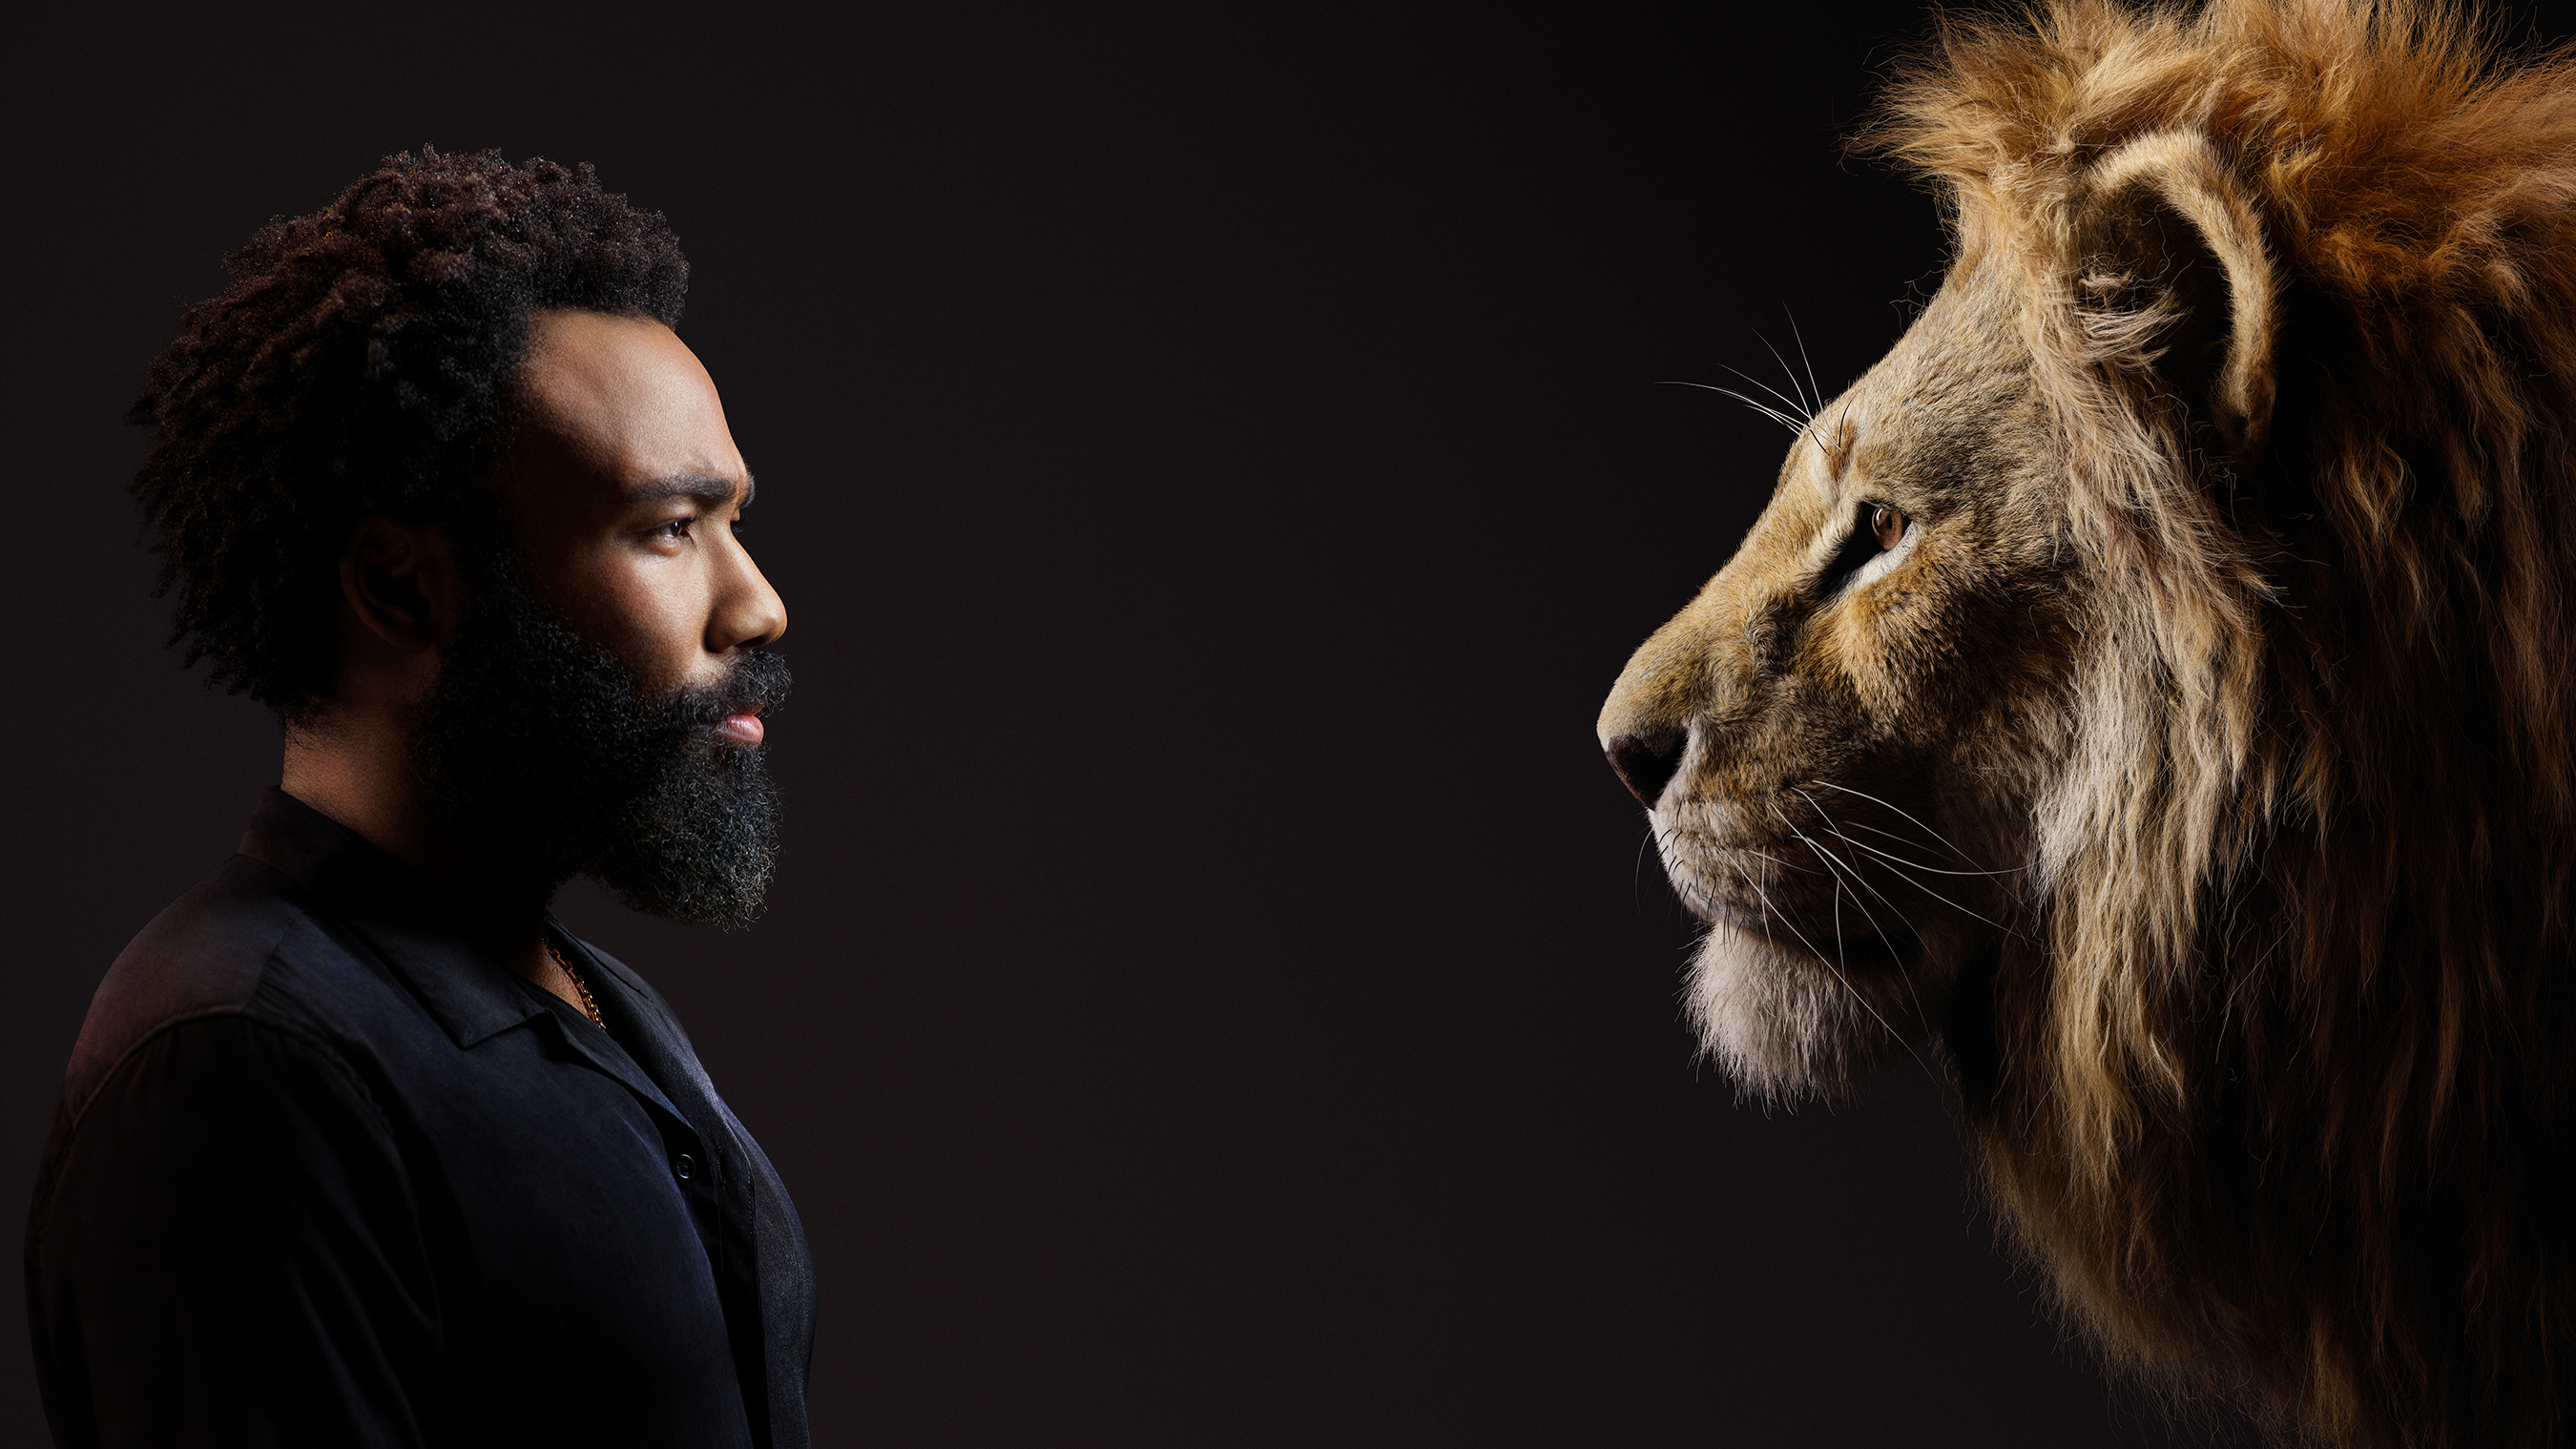 Donald Glover as Simba in The Lion King